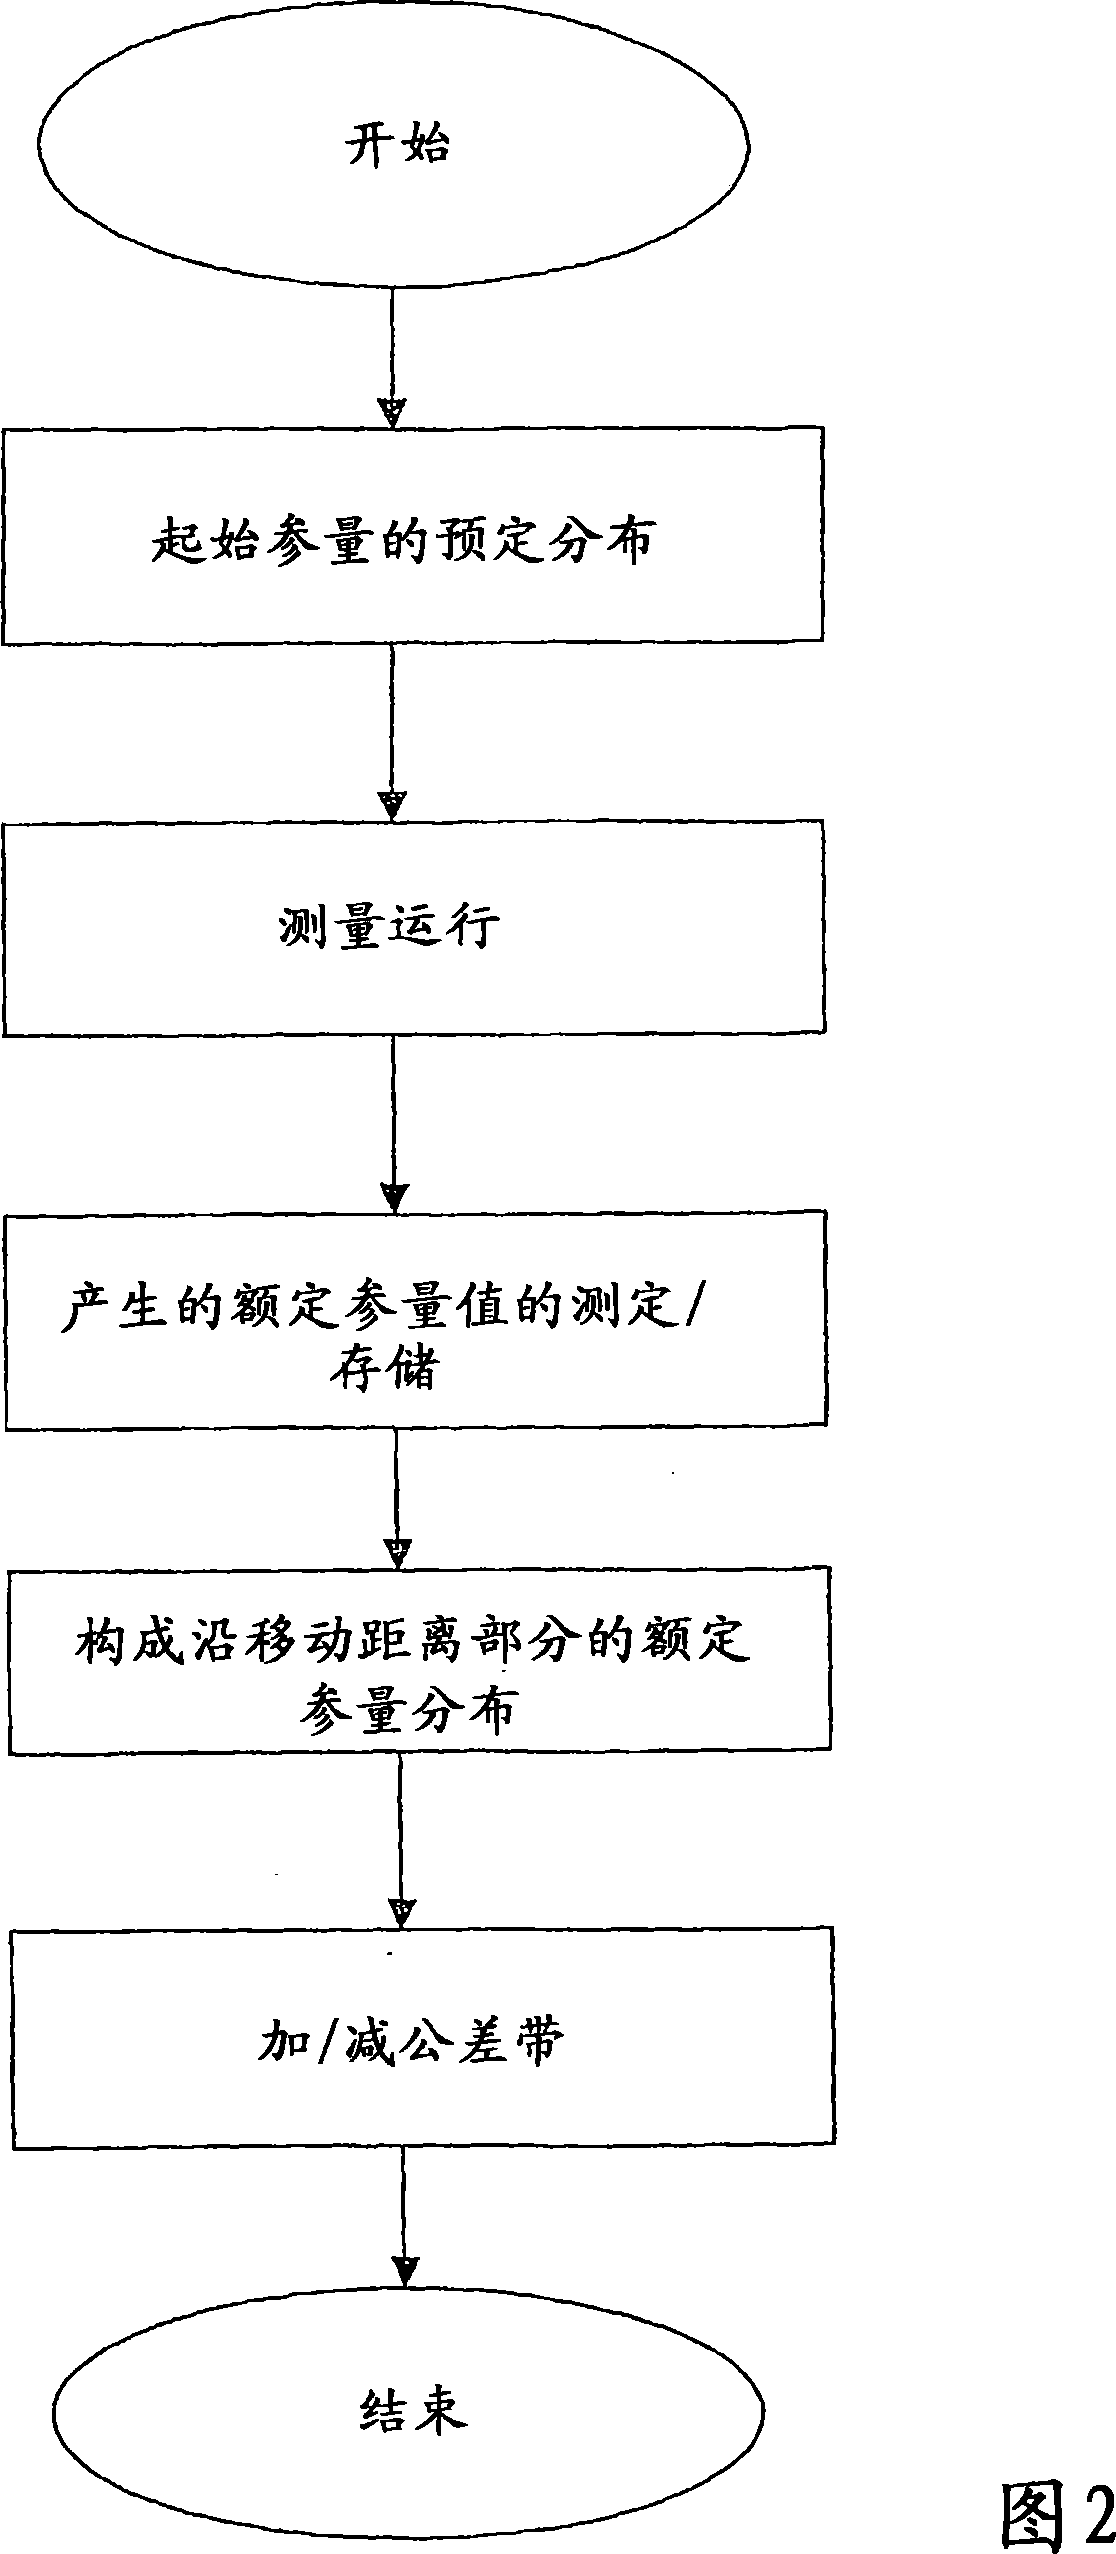 Method for operating an injection molding machine